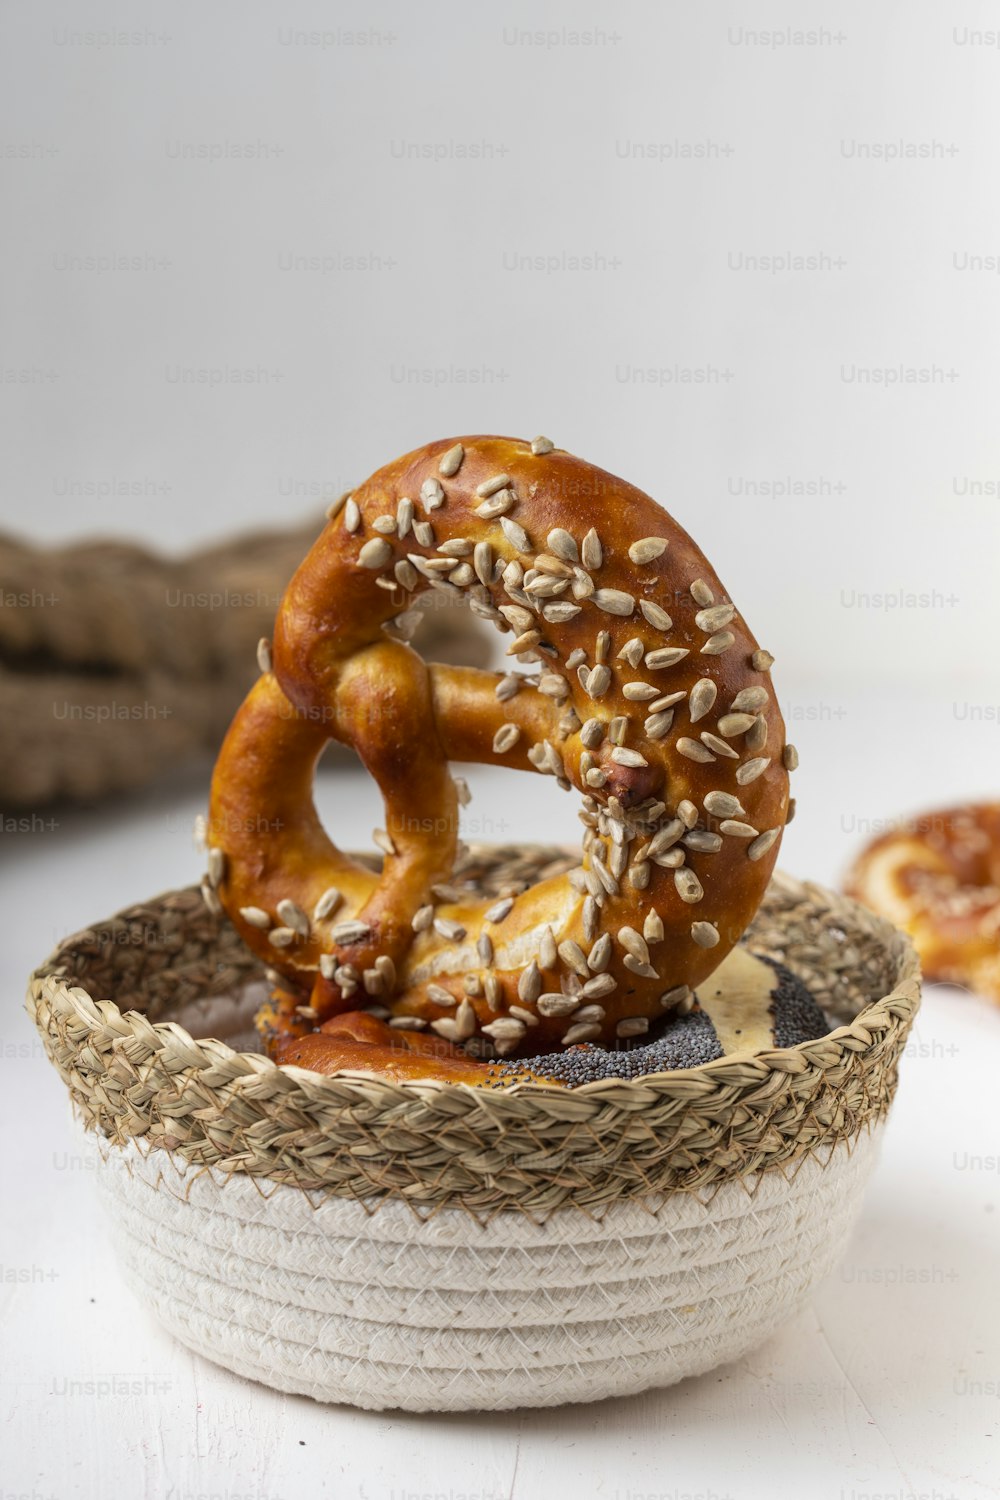 two pretzels in a basket with sesame seeds